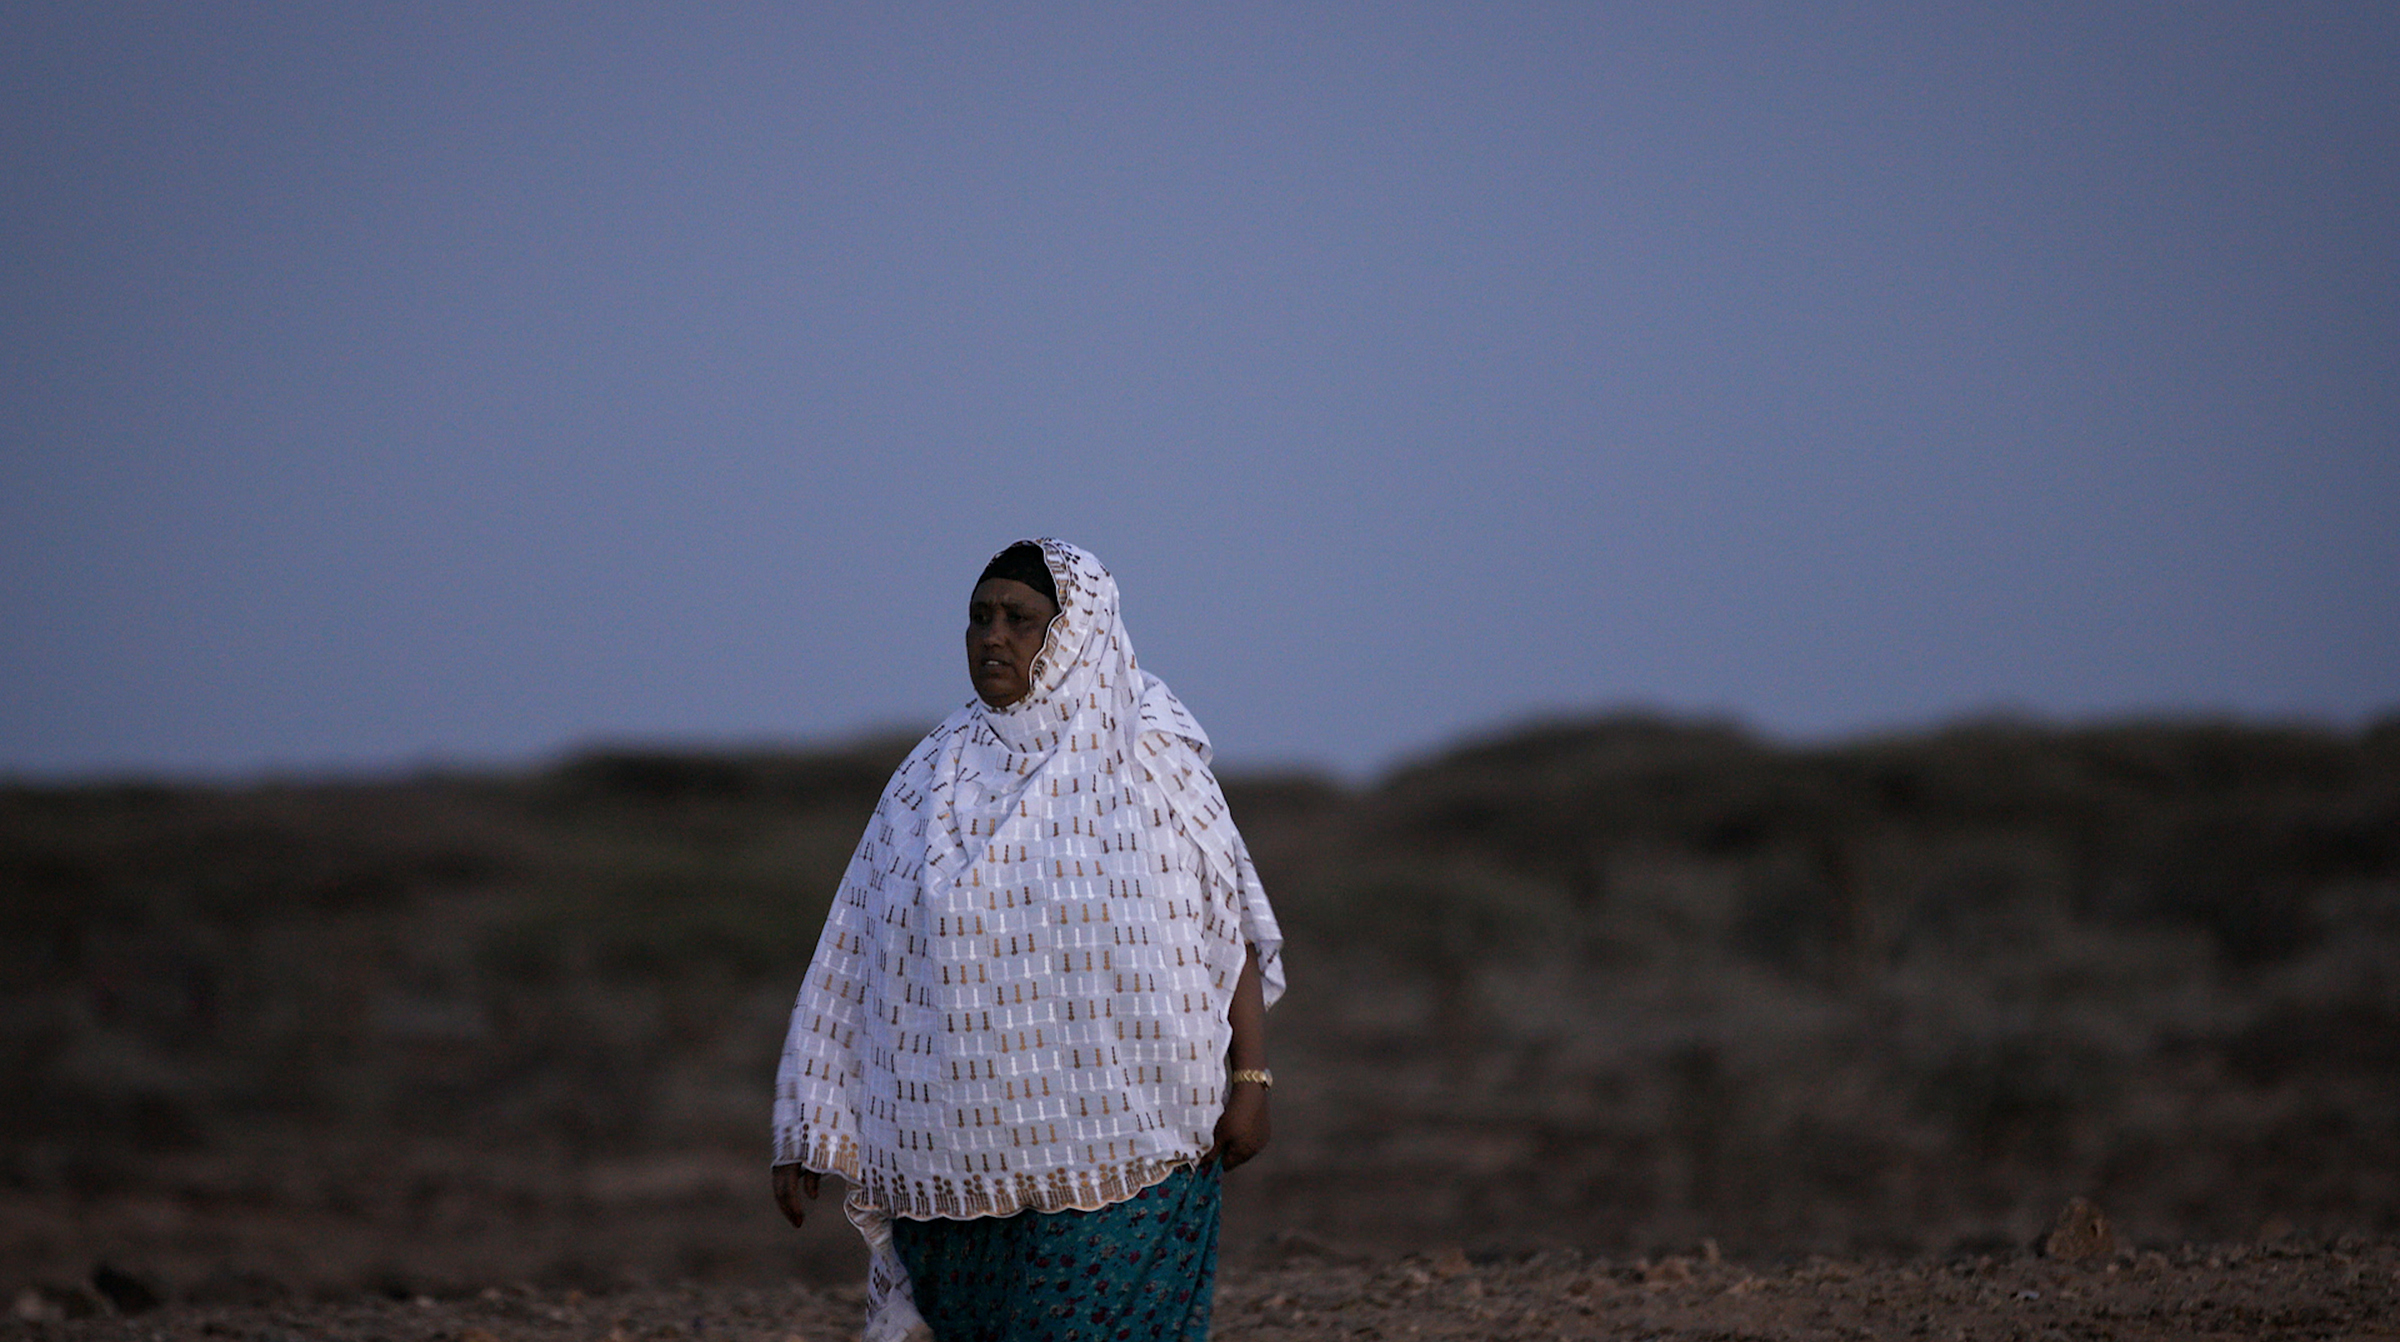 This frame grab from a video taken for TIME on 15 March 2020, shows Nuria Gollo, a native Gabra and a human rights activist, victim of child marriage and FGM survivor, who has made it her life's mission to end child marriage in her community. The practice has been exacerbated by climate change she says with more Garba marrying off their daughters to survive.